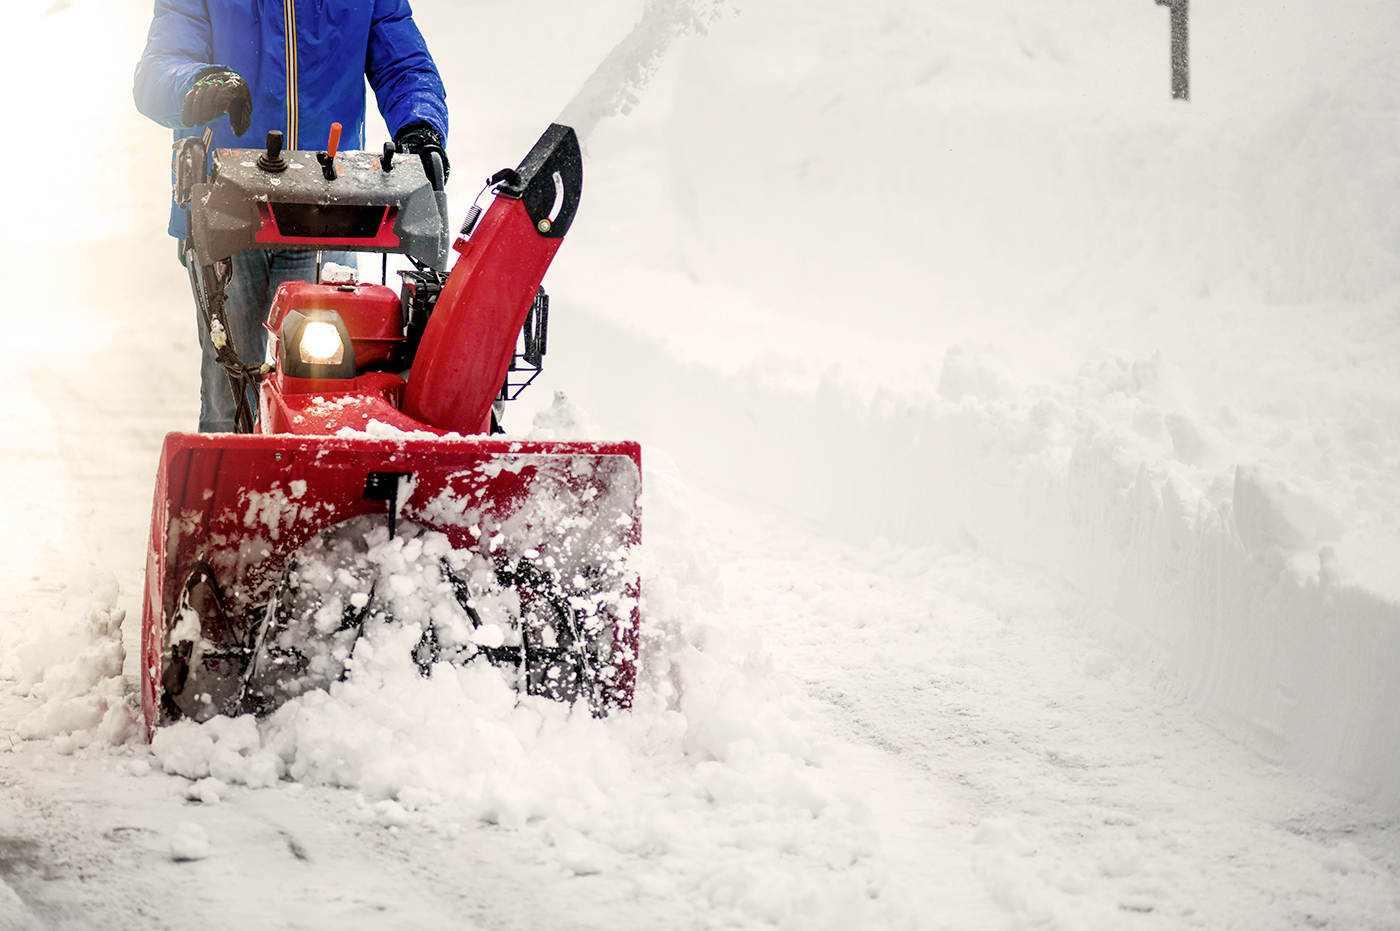 A person using a snow thrower to clear snow.